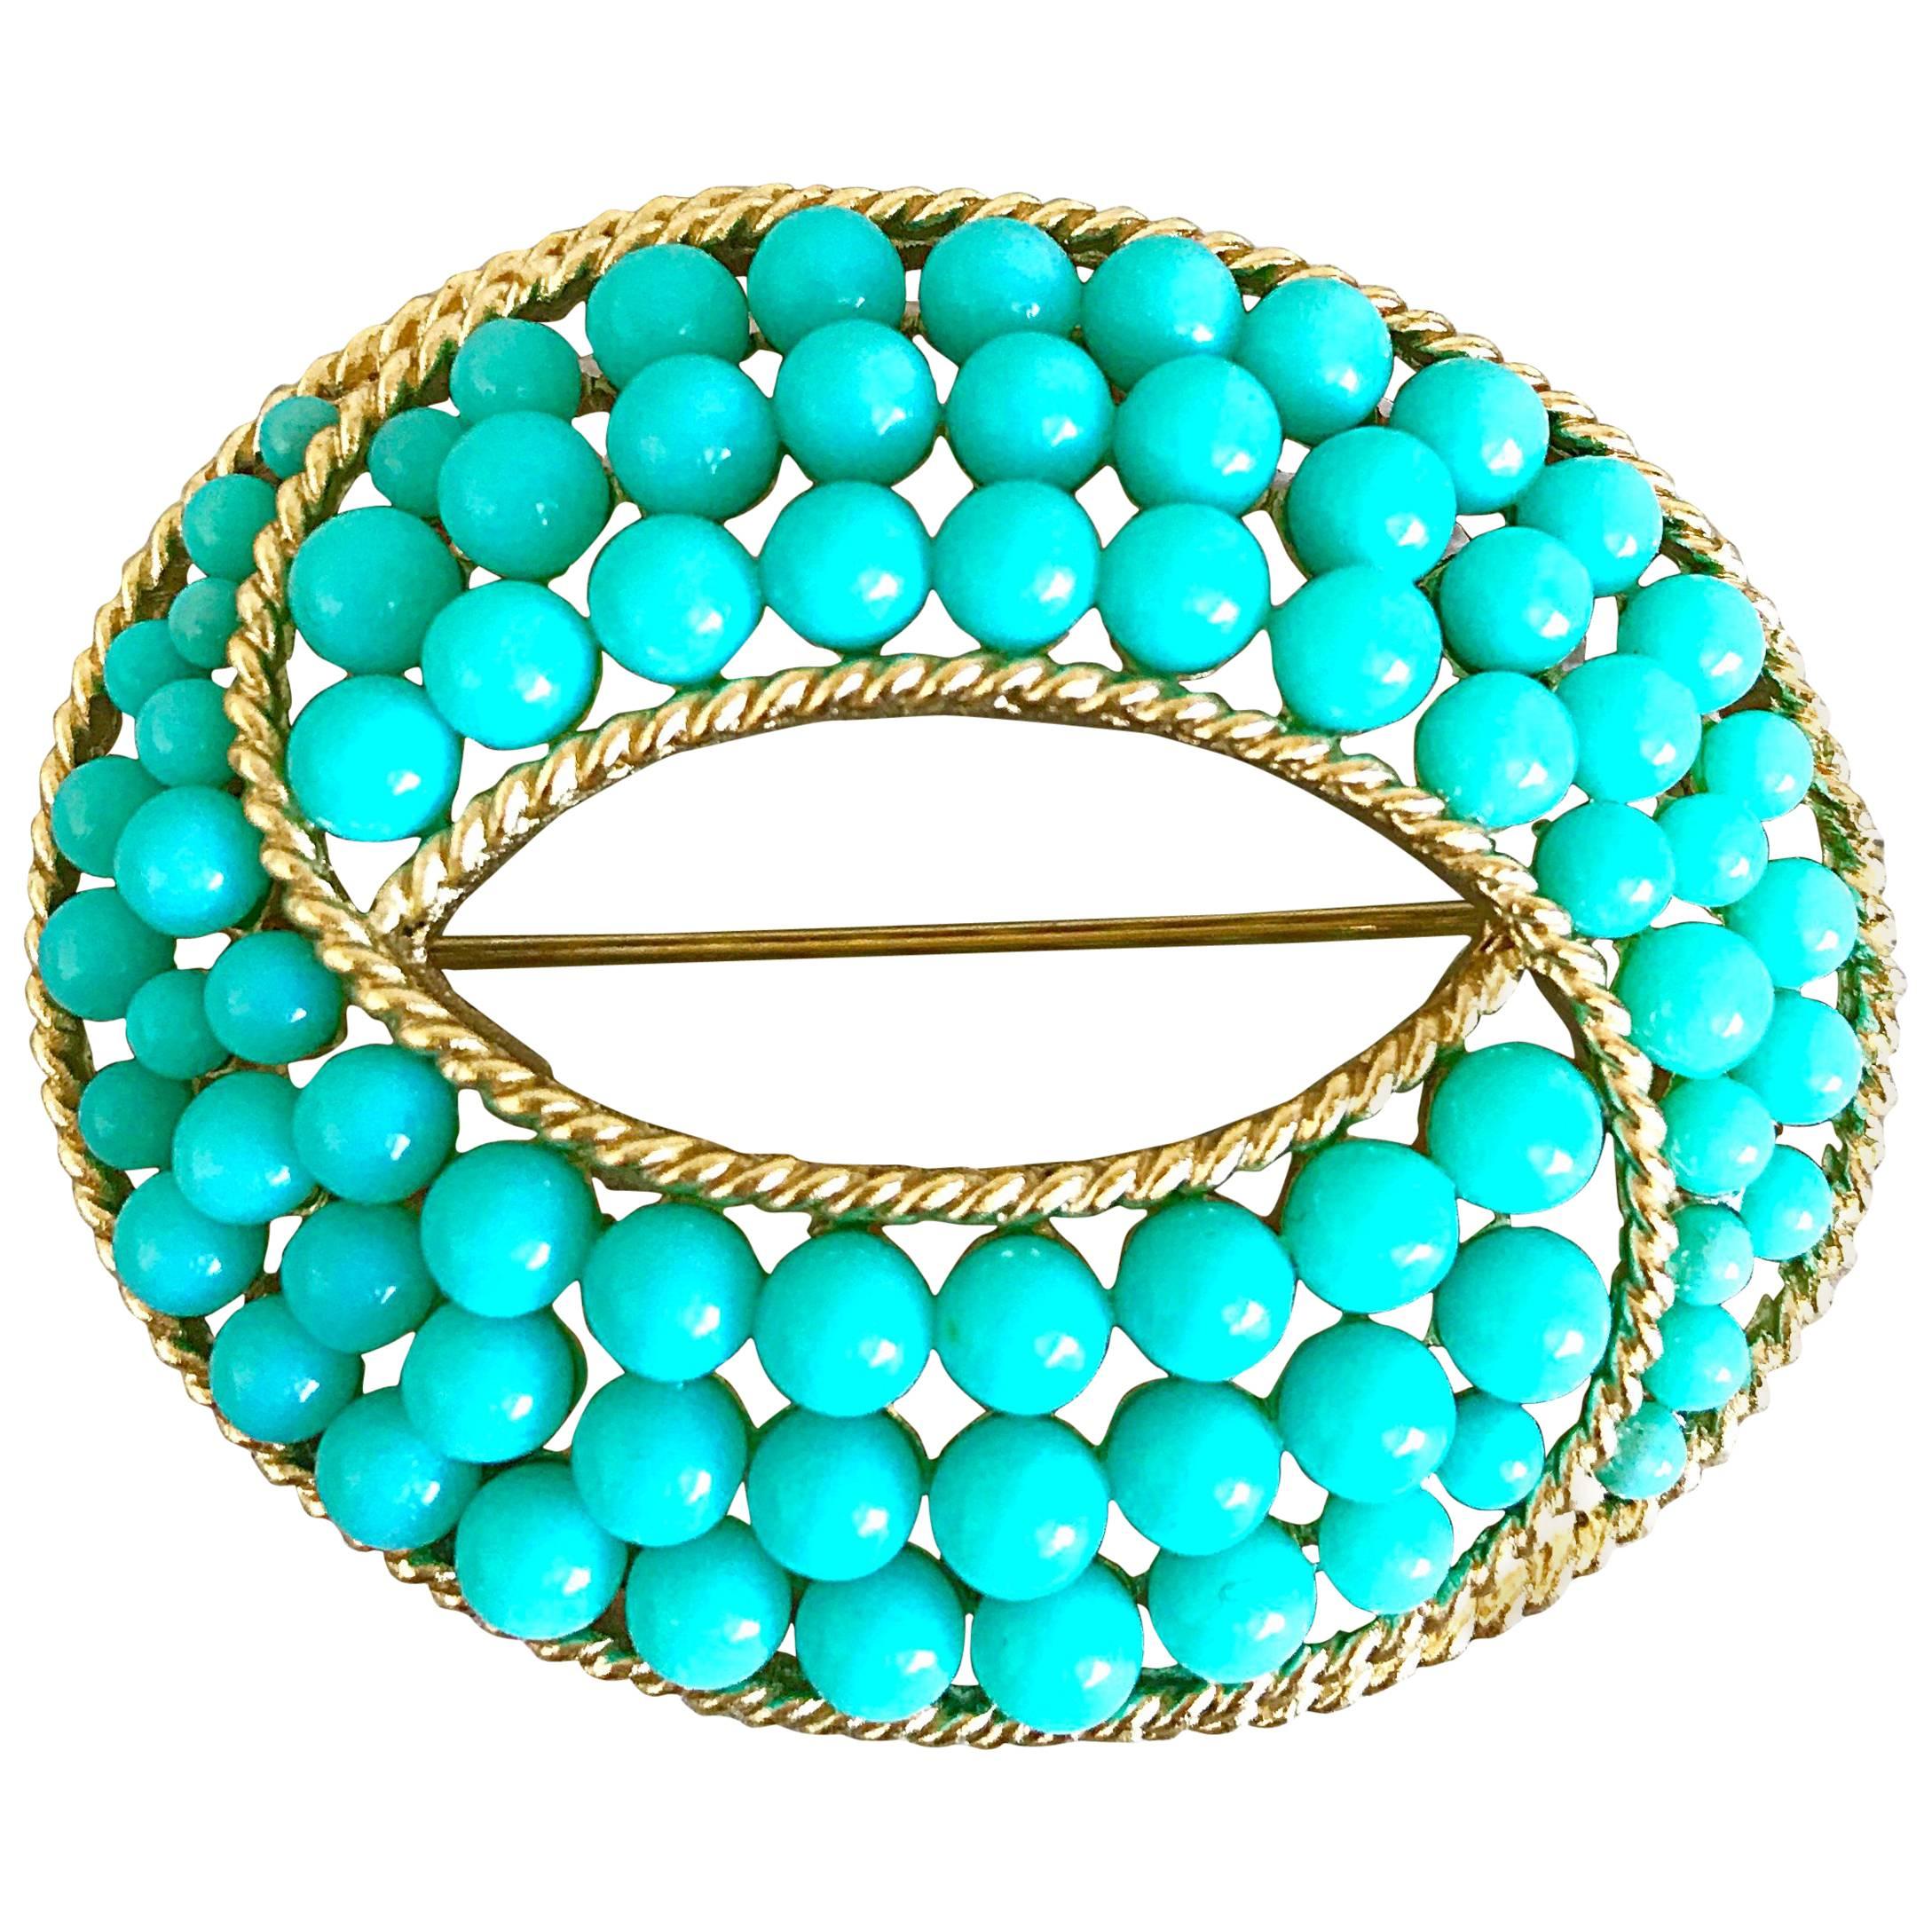 Trifari 1960s Turquoise Blue + Gold Oval 60s Signed Vintage Ball Brooch Pin